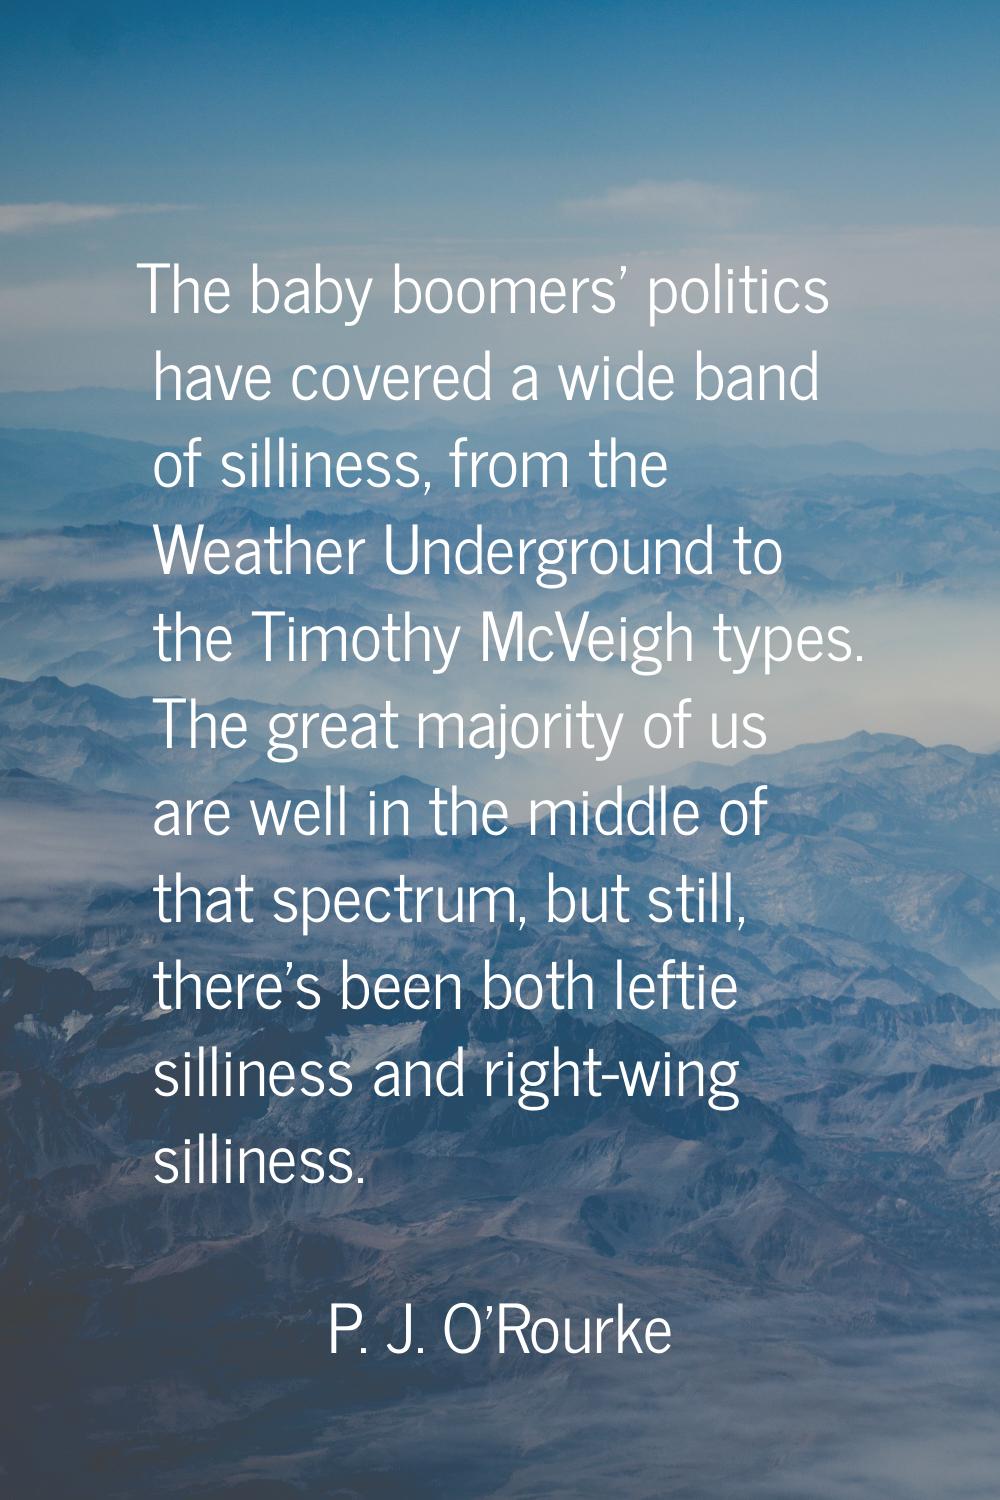 The baby boomers' politics have covered a wide band of silliness, from the Weather Underground to t